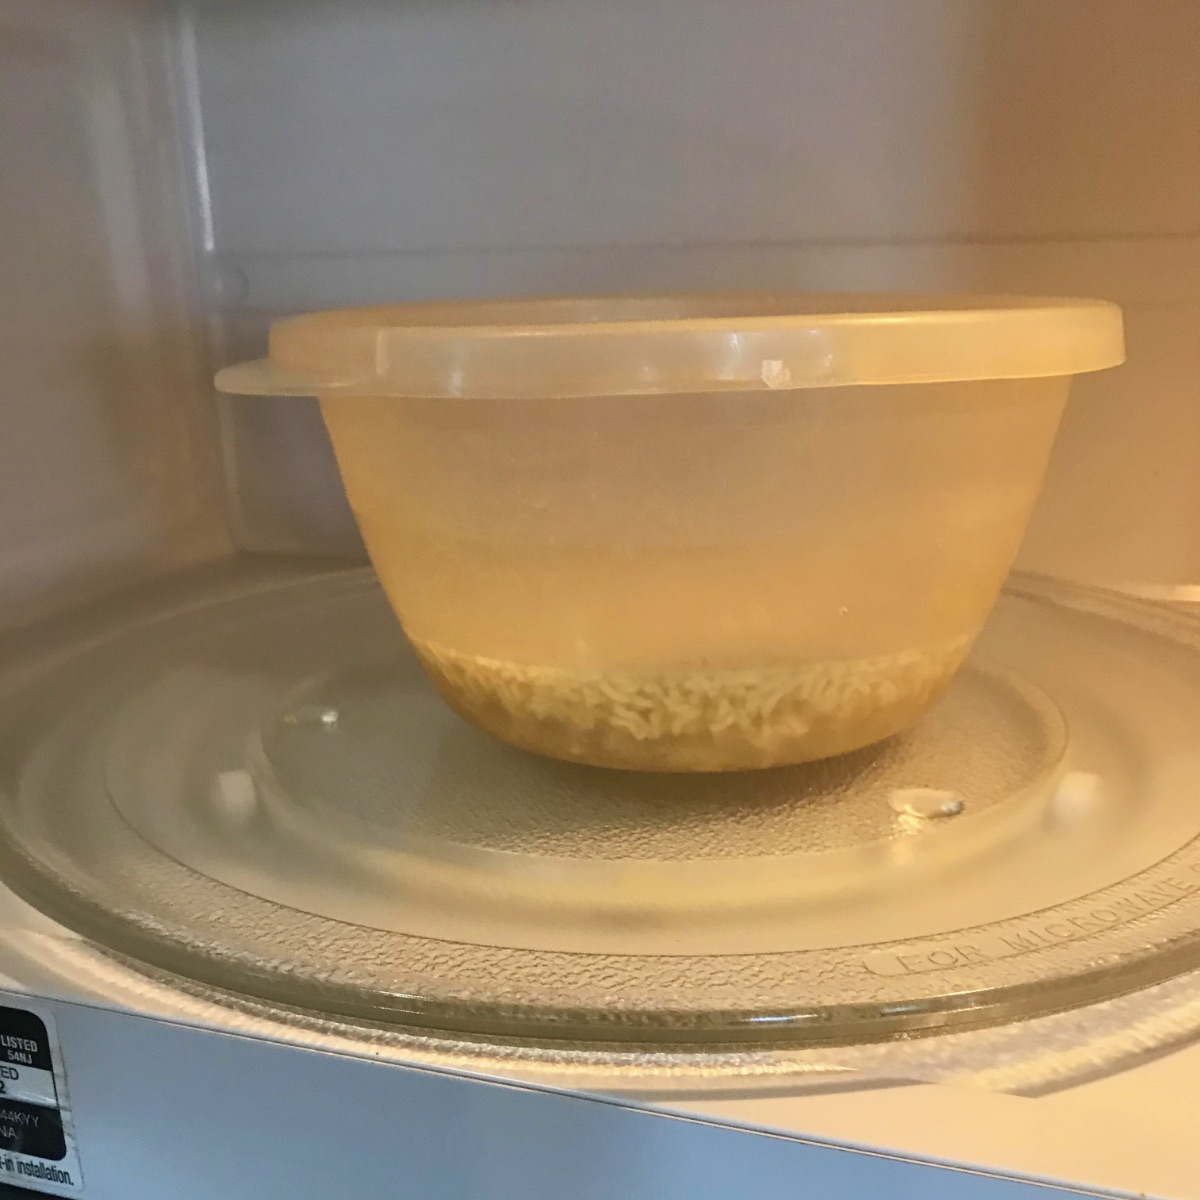 SIde view showing crushed ramen noodles in a microwave-safe bowl, covered with water inside the microwave about to be heated up.